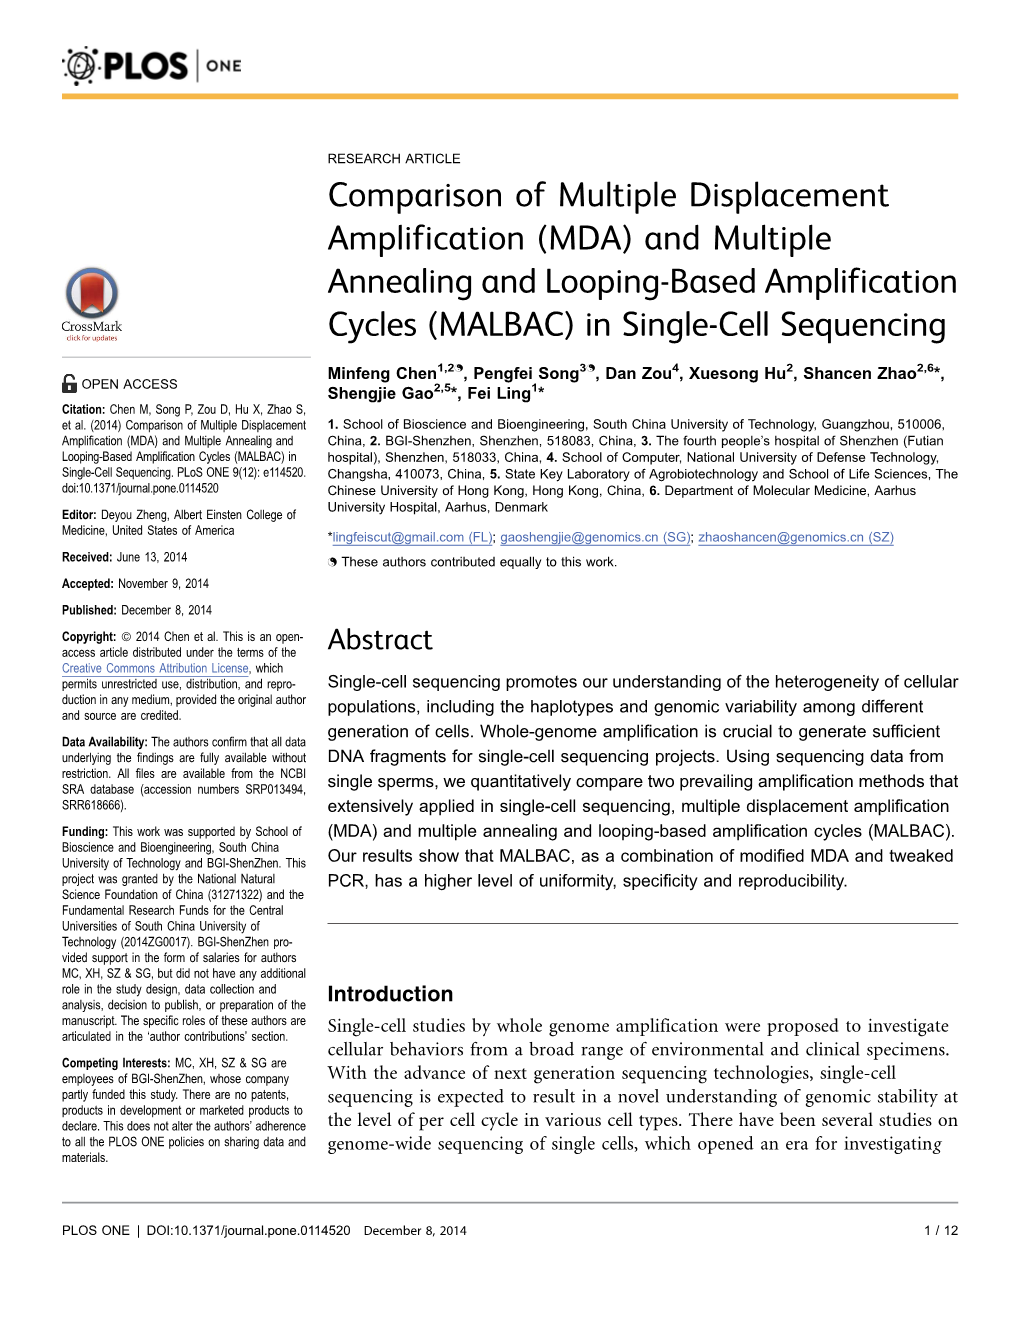 (MDA) and Multiple Annealing and Looping-Based Amplification Cycles (MALBAC) in Single-Cell Sequencing